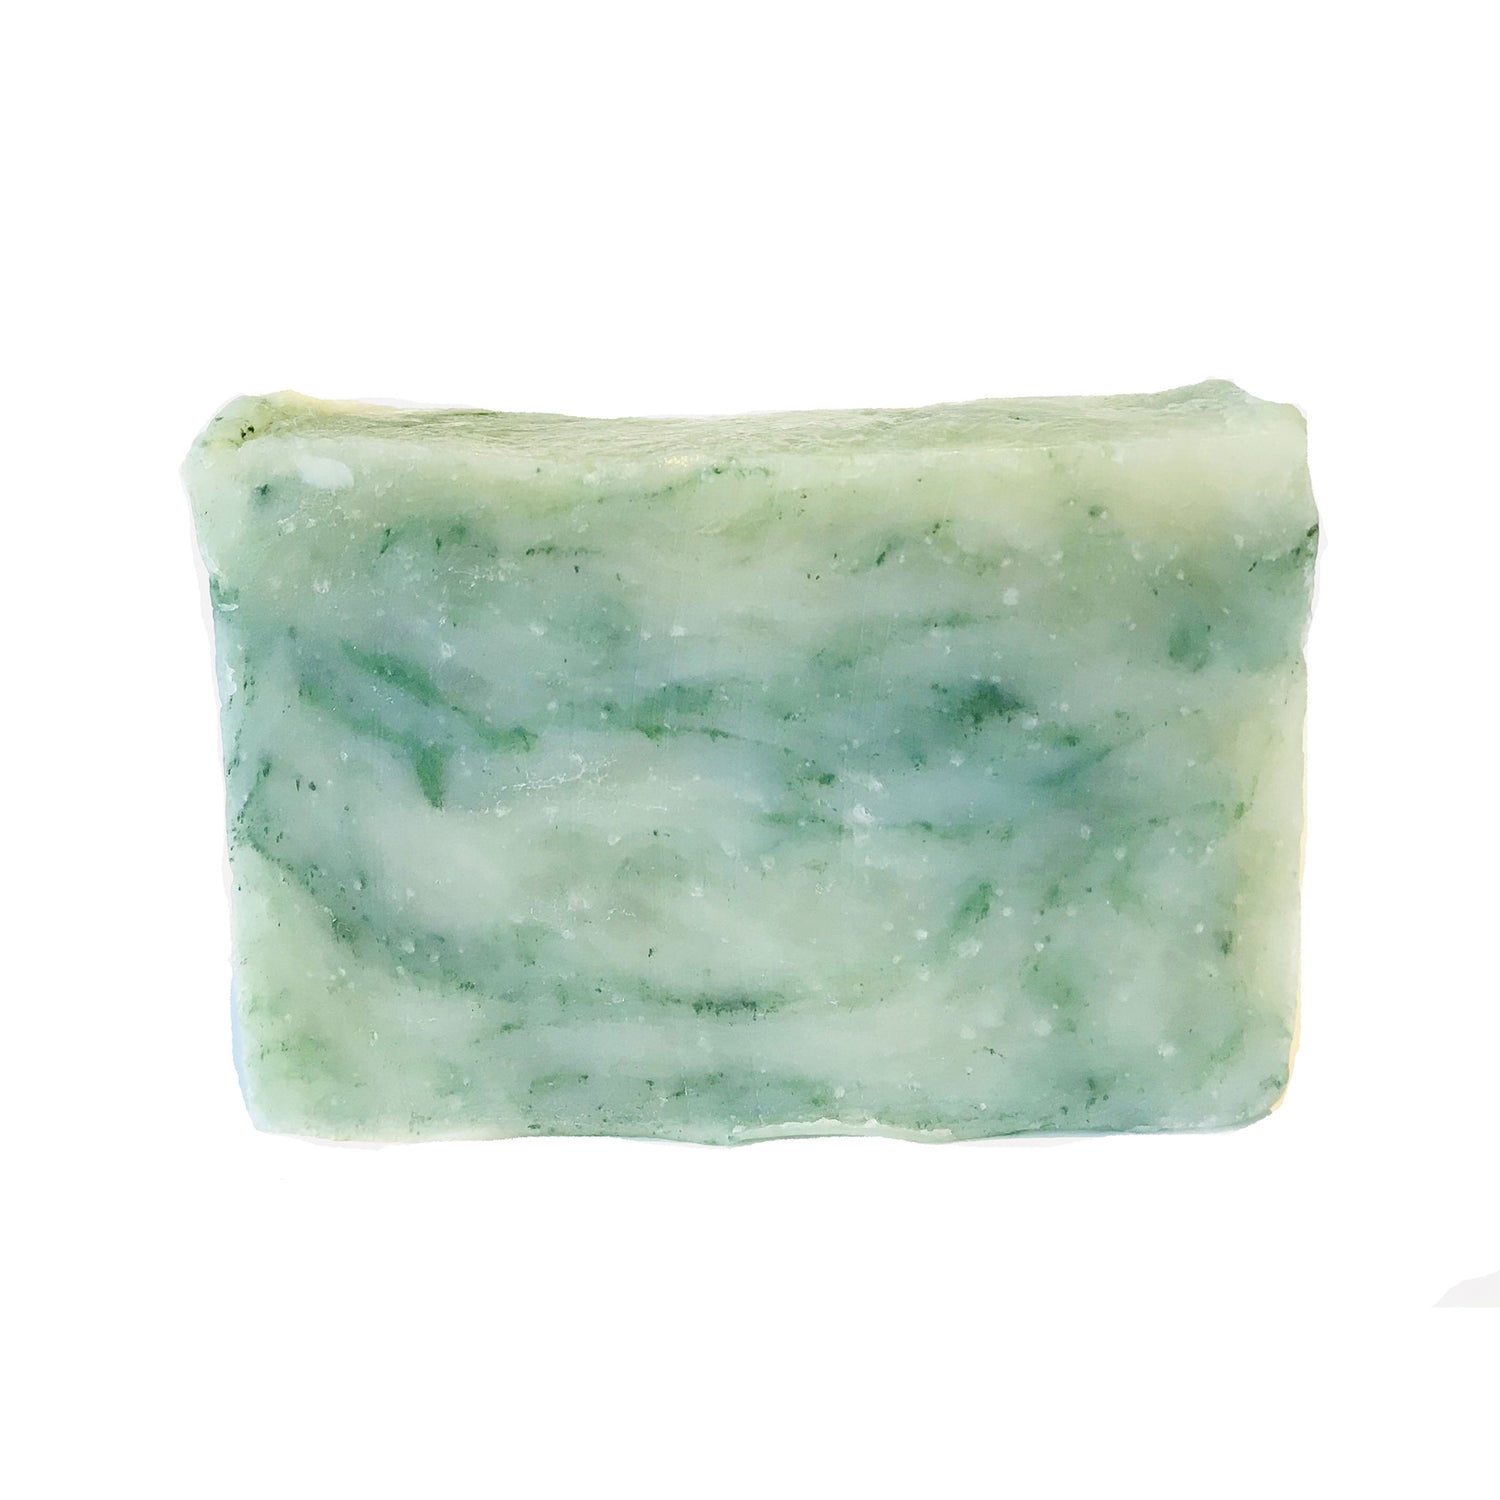 Bamboo scented bar soap by JDNatlady's Creations